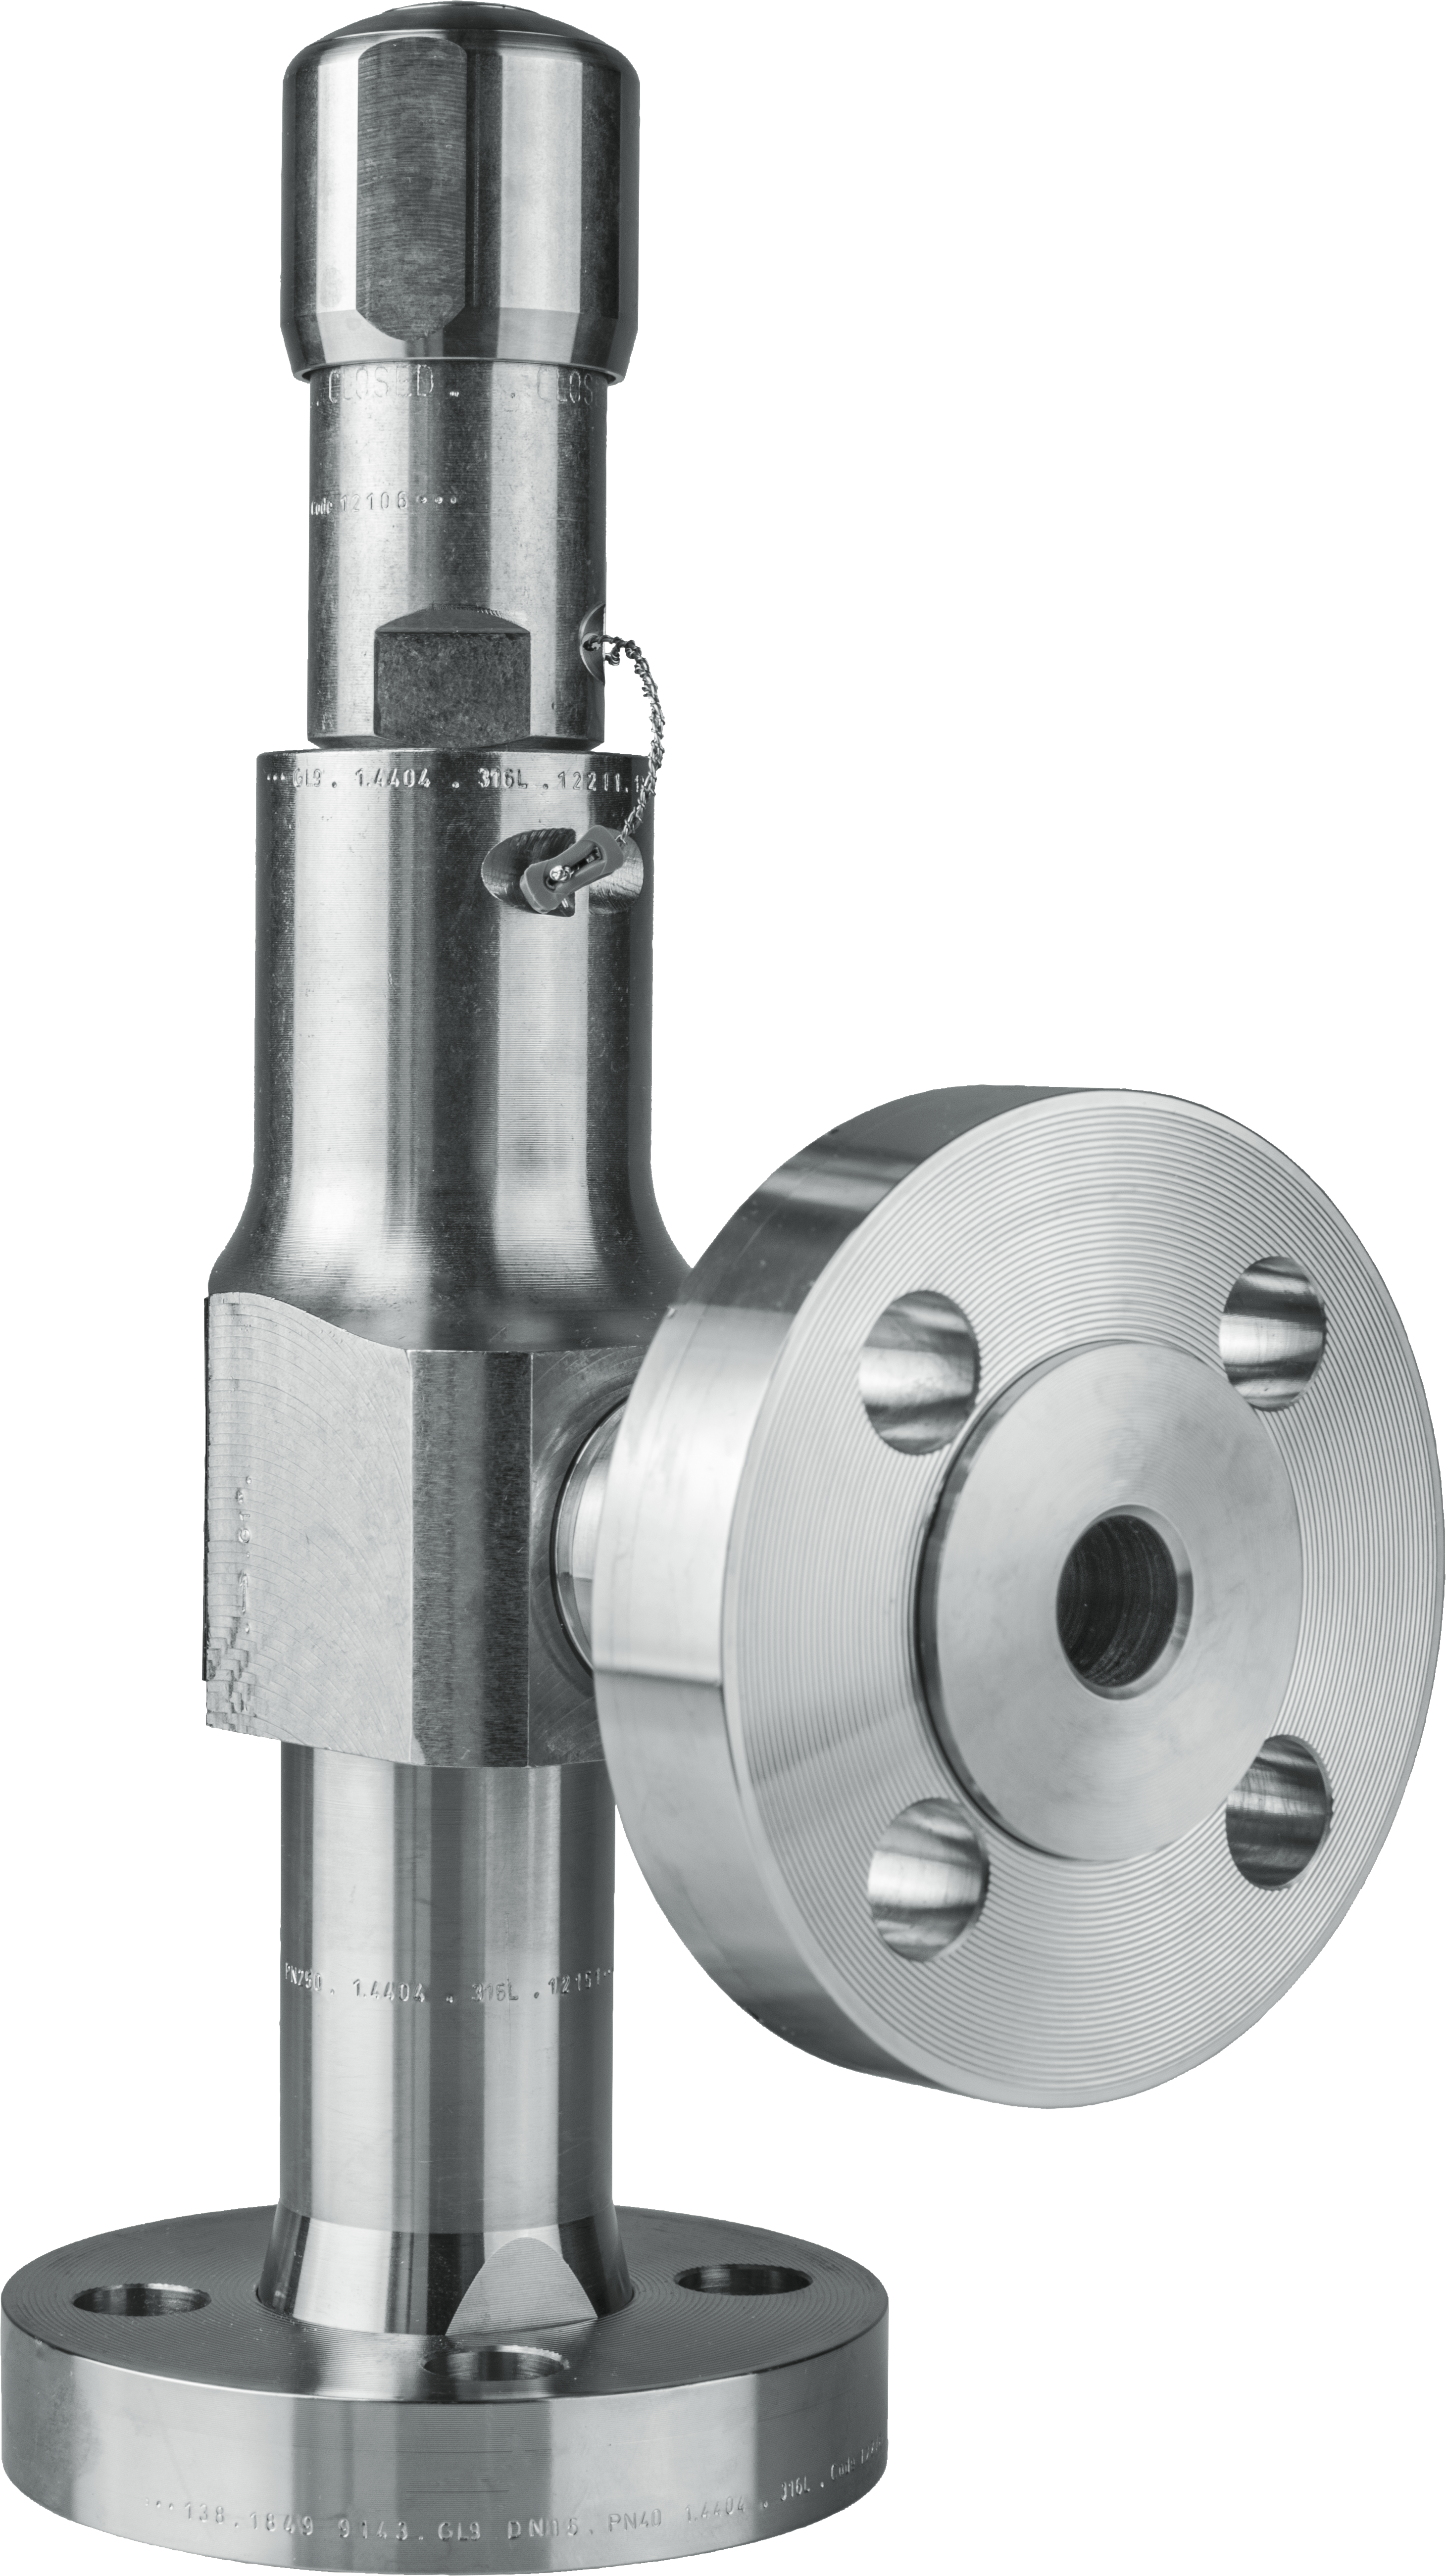 LESER Compact Performance Safety Valve Type 439